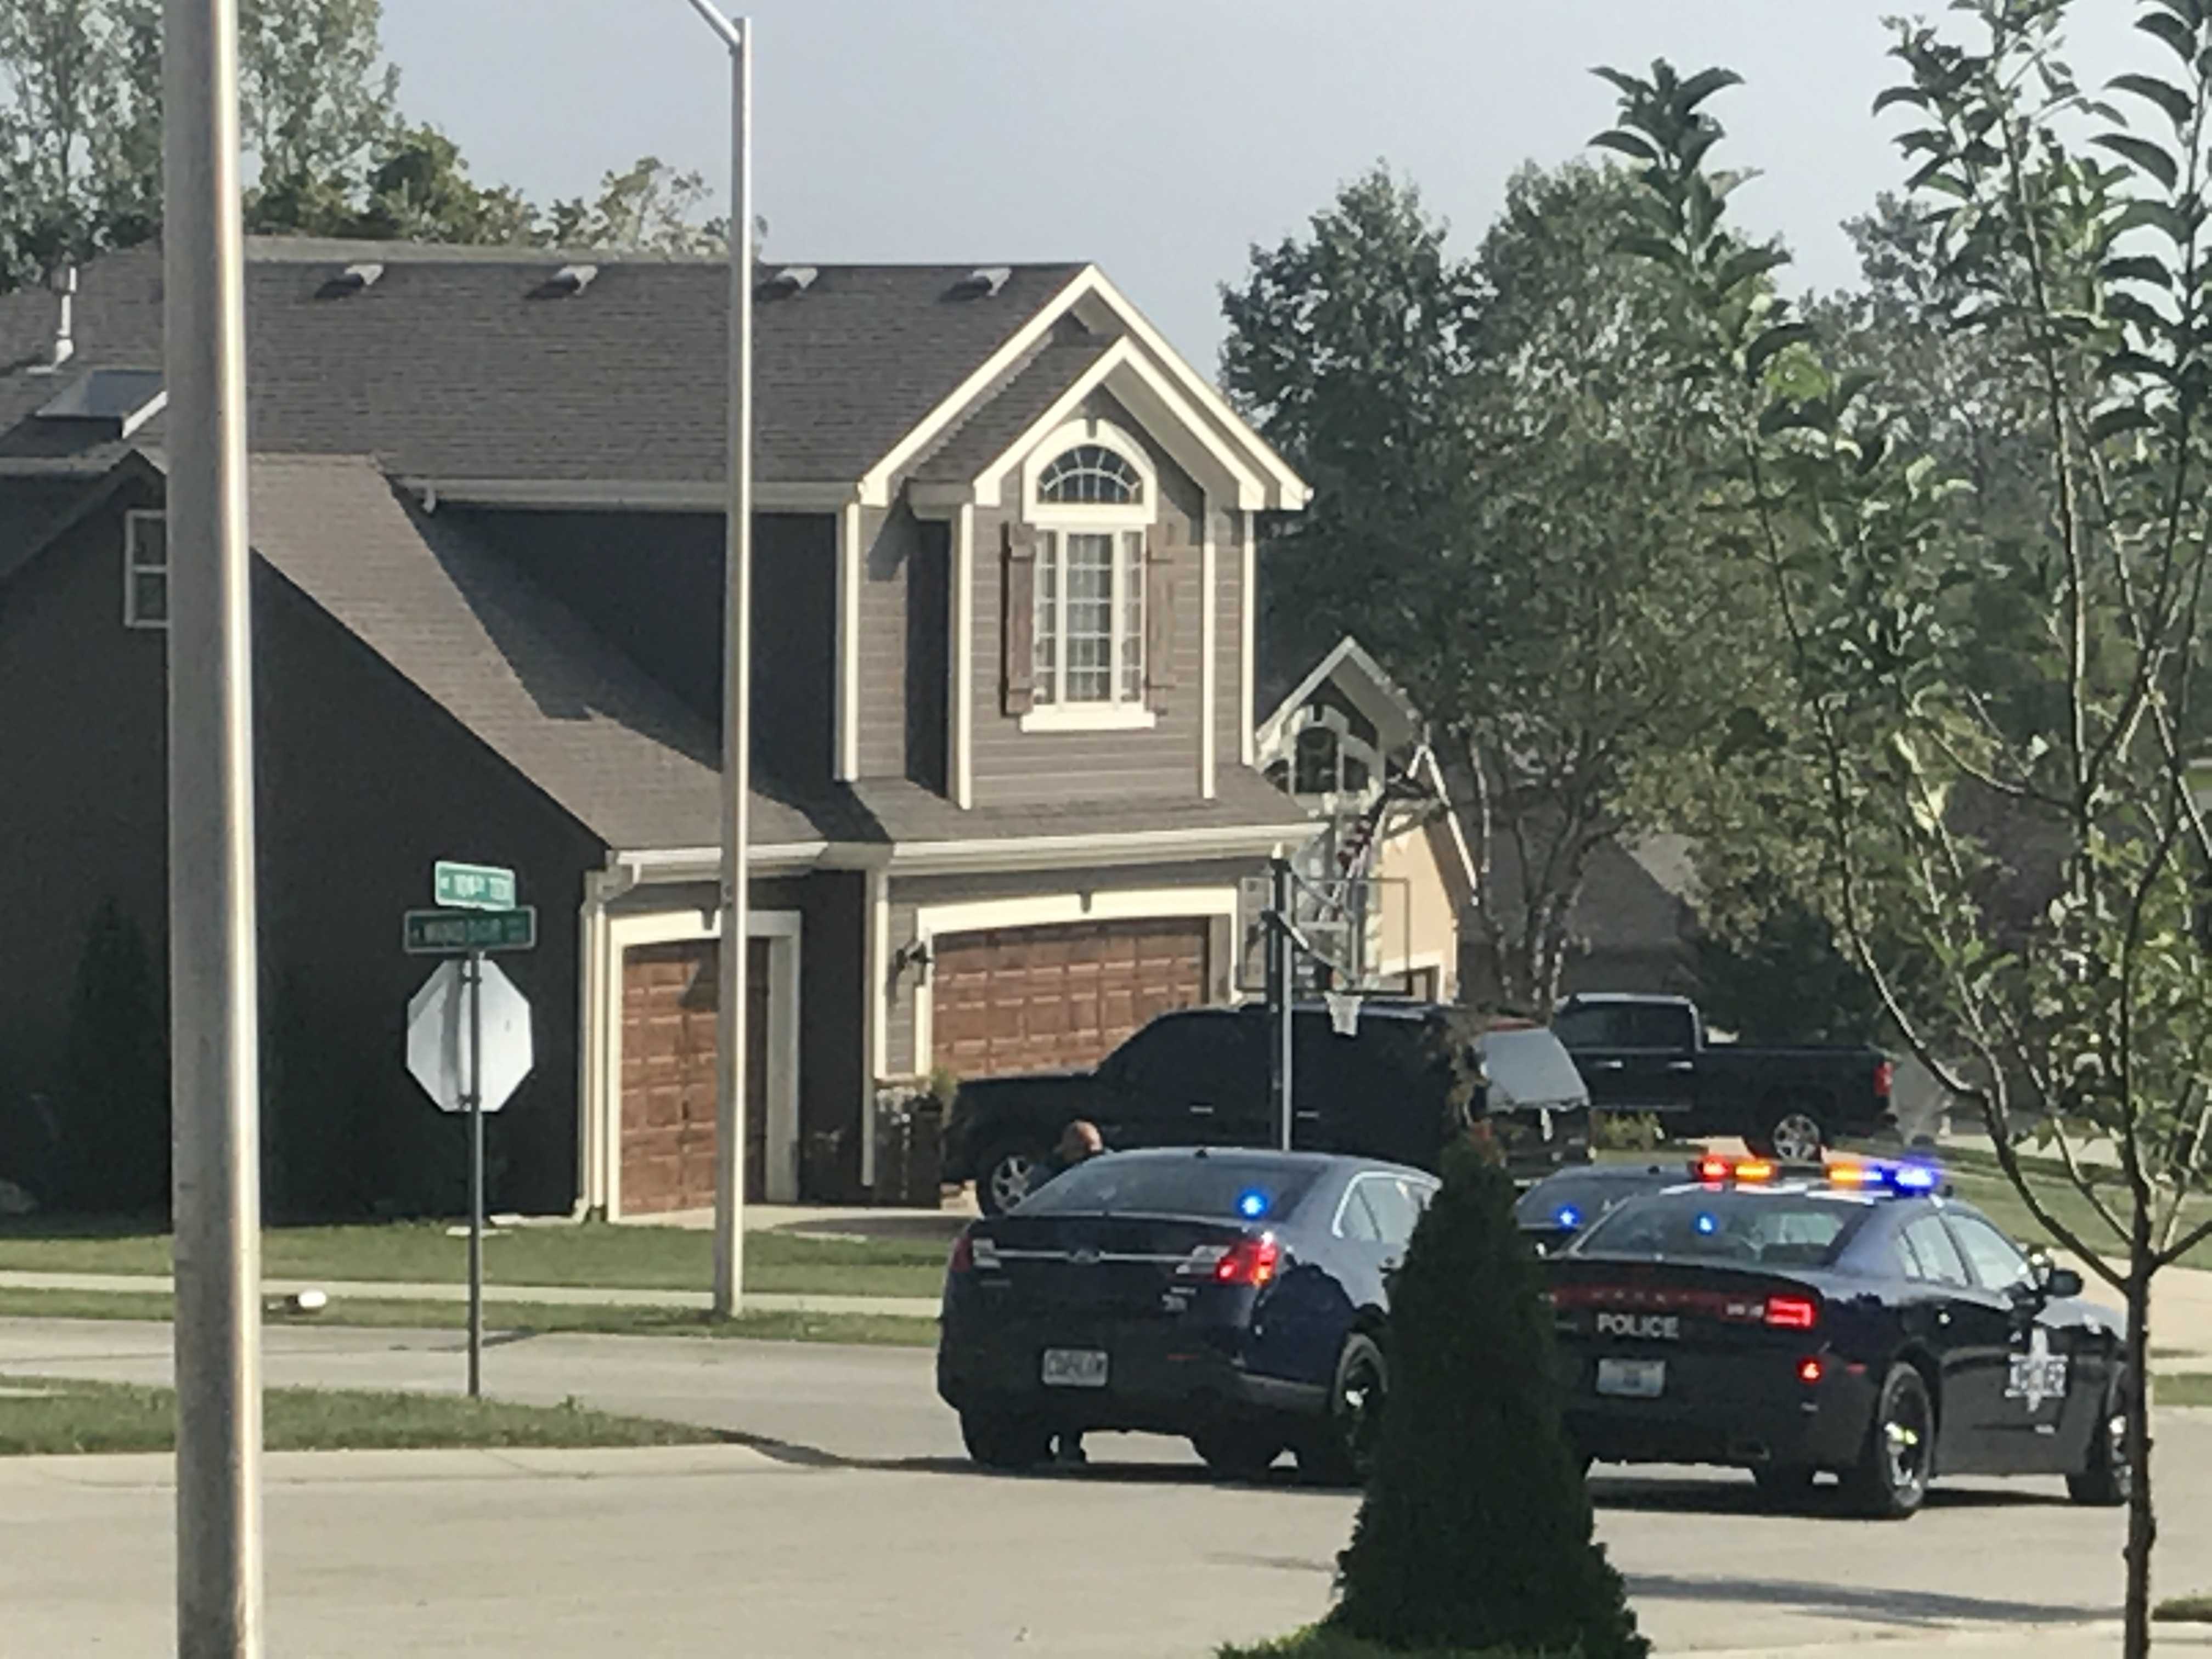 KCPD investigates suspicious device found on SUV in Northland